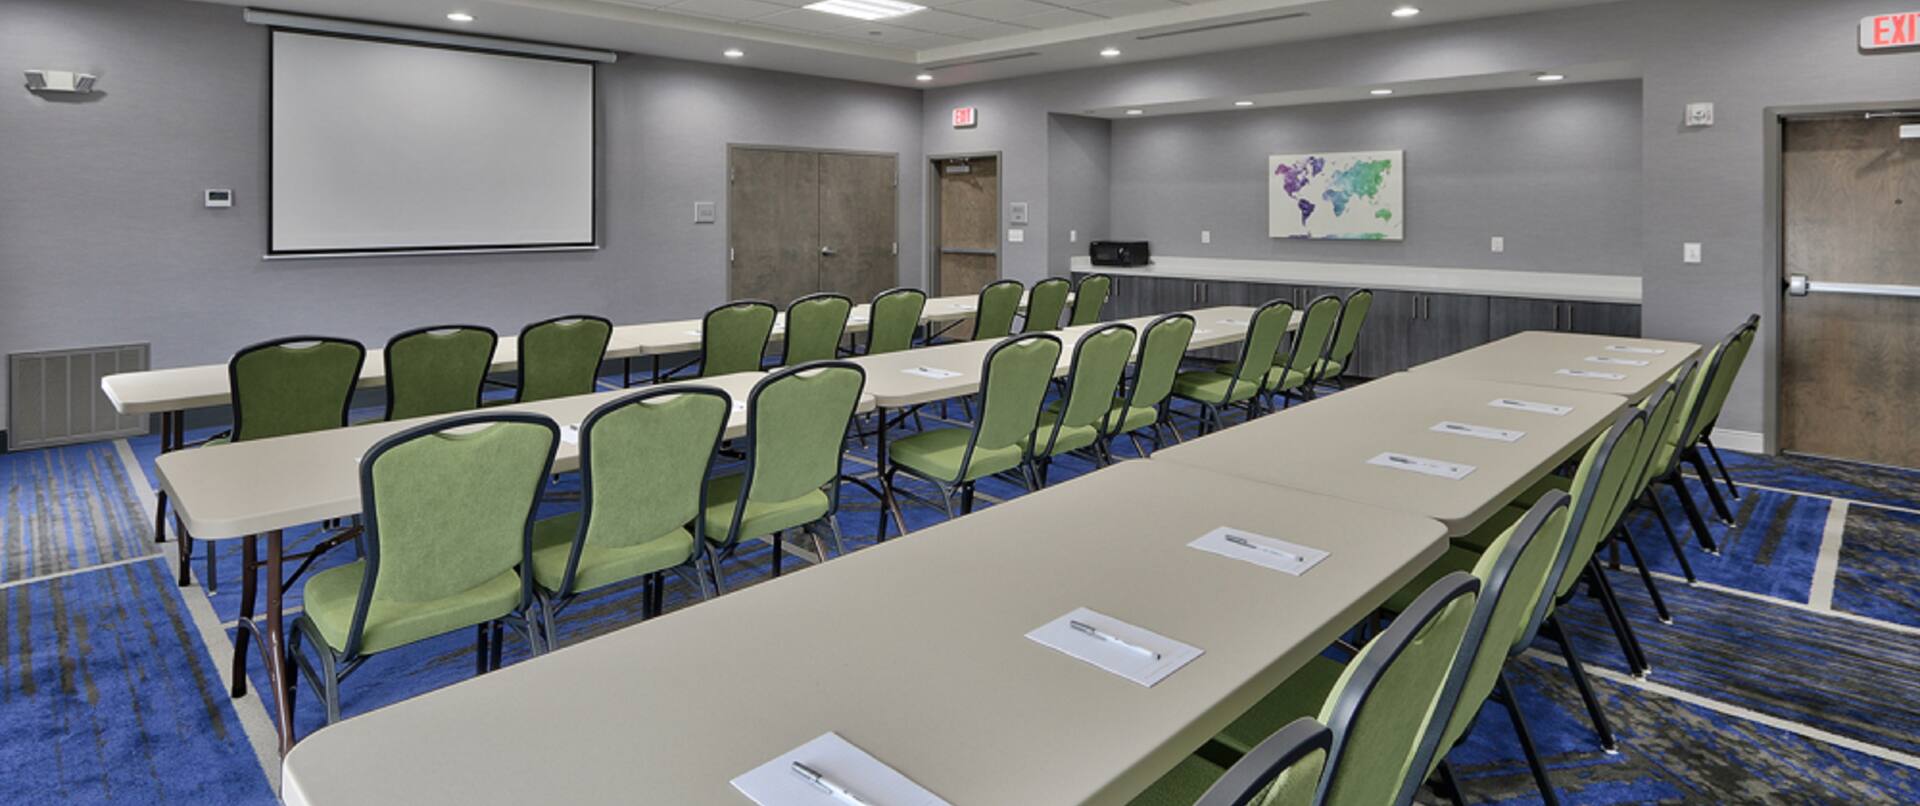 Meeting Room in Classroom Setup with Projector Screen and Seats for 27 People